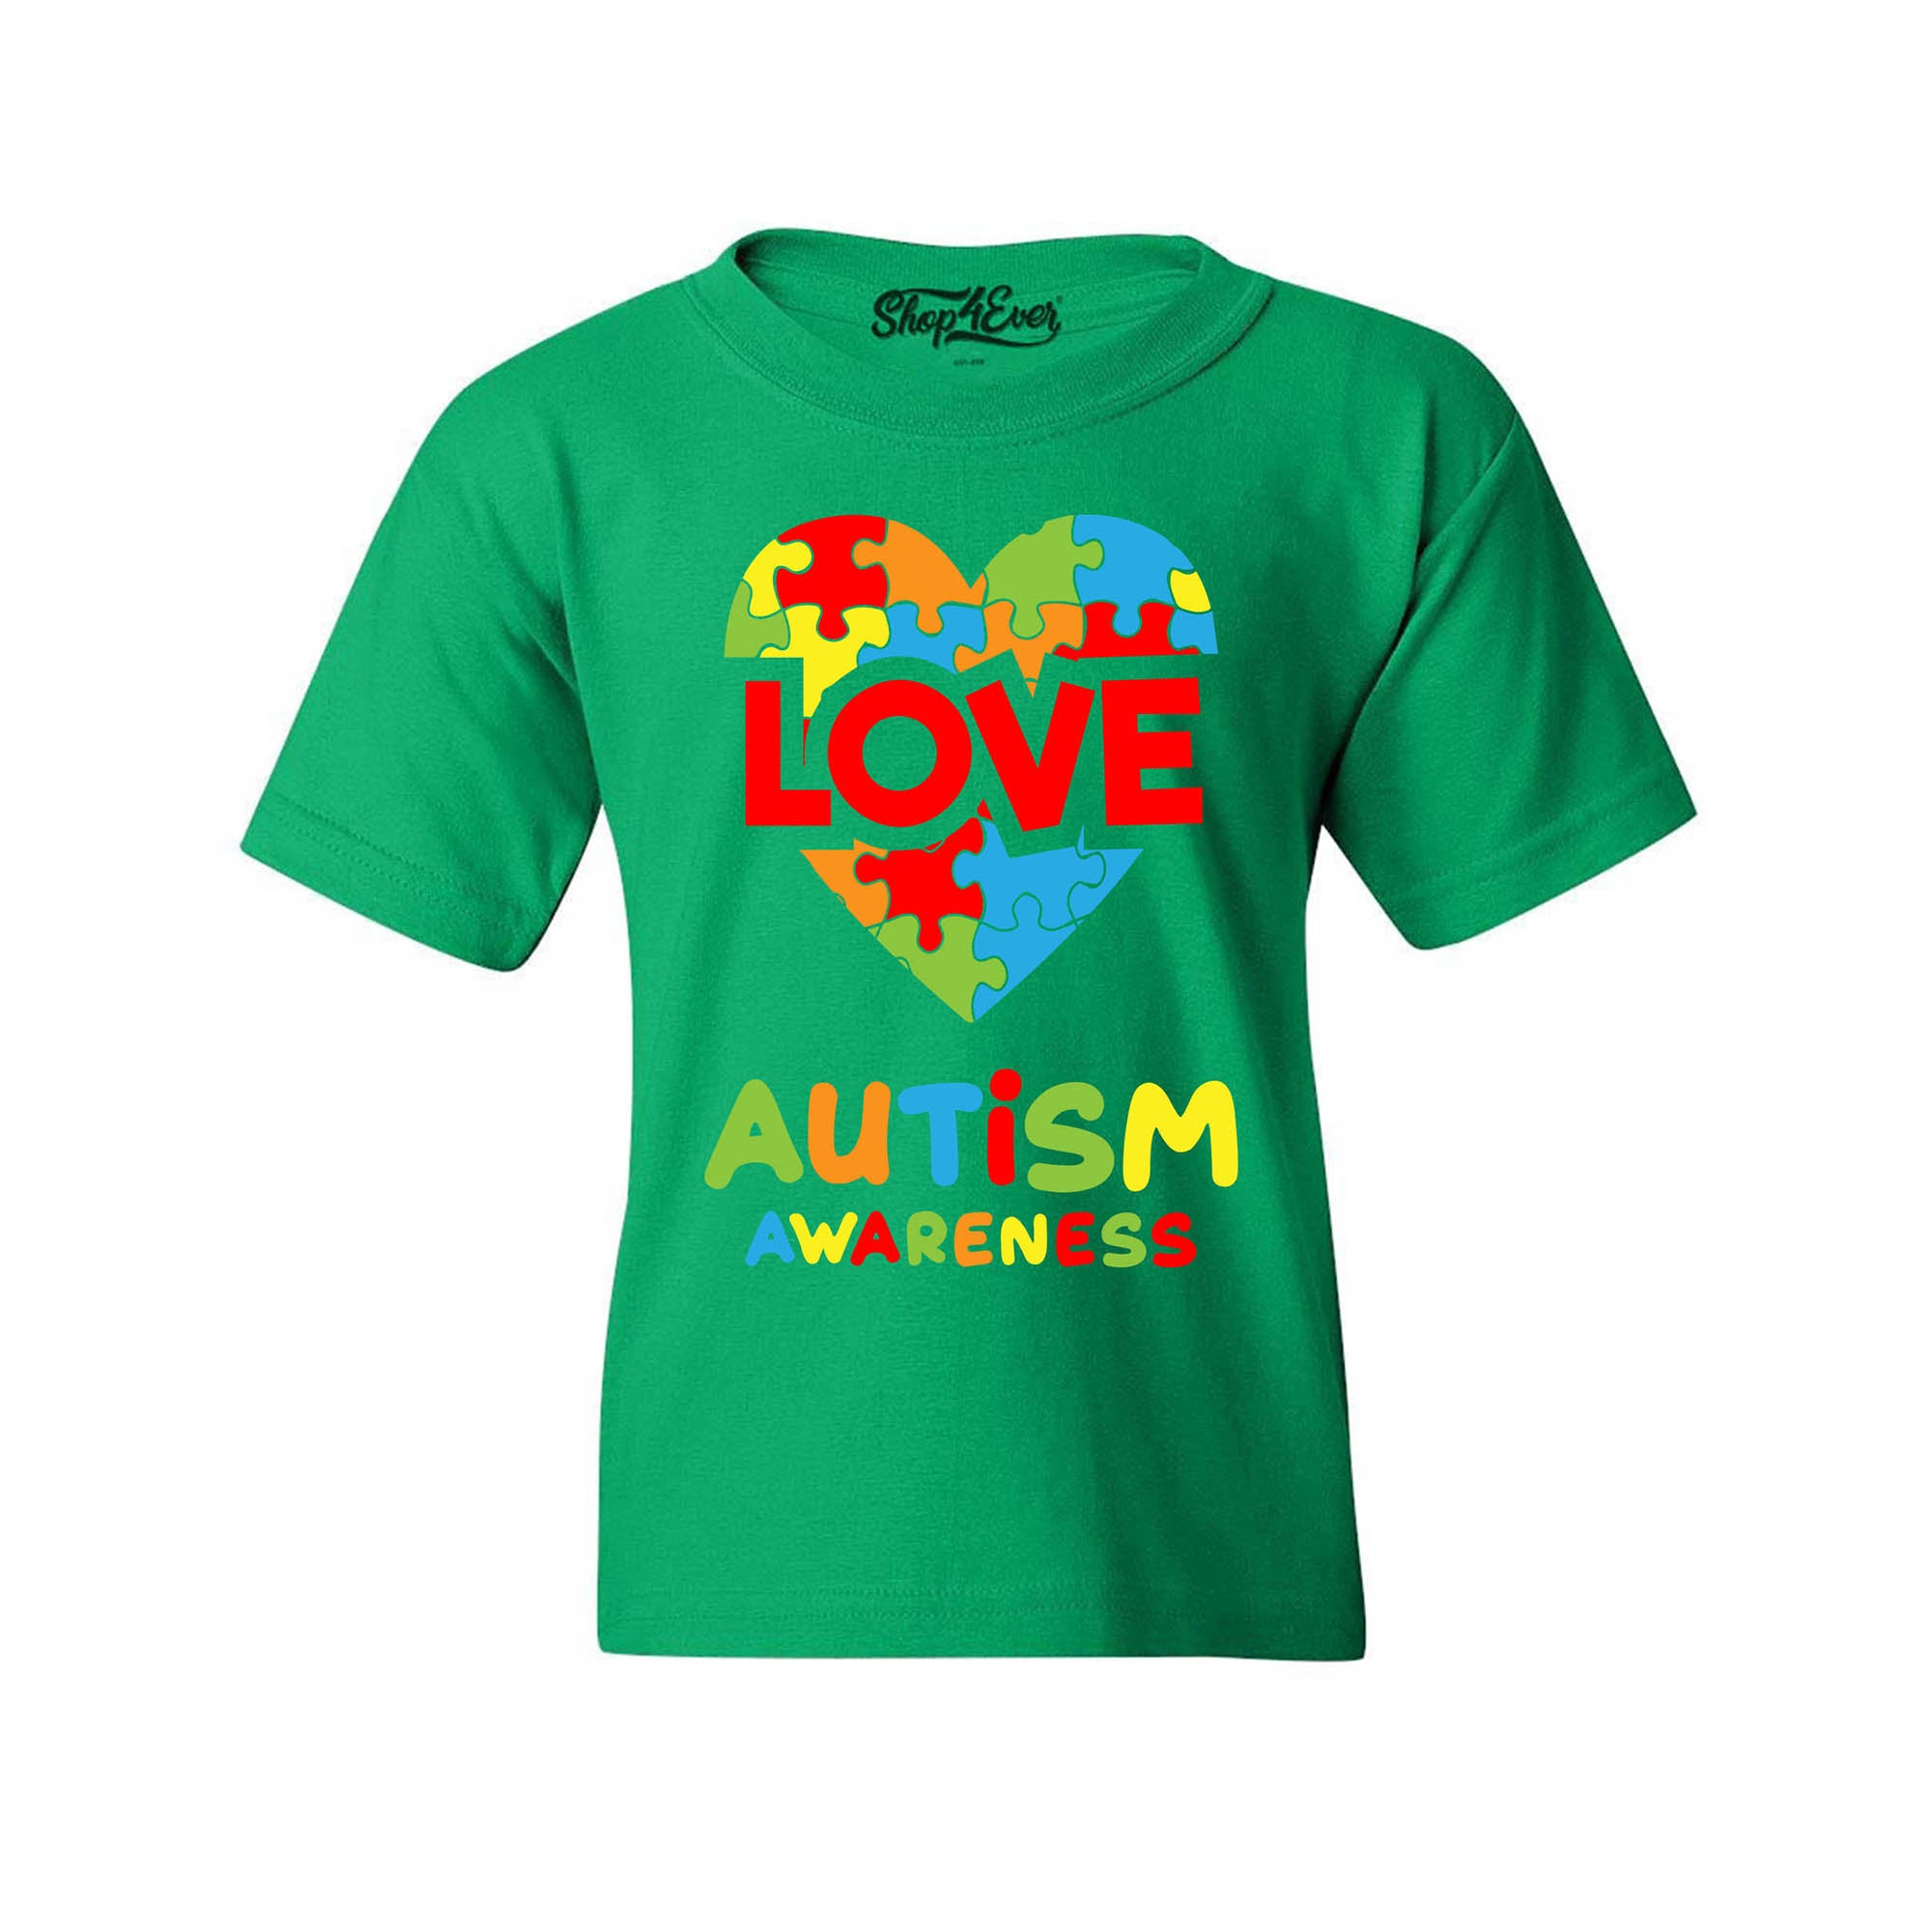 Autism Awareness Love with Puzzled Heart Child's T-Shirt Kids Tee